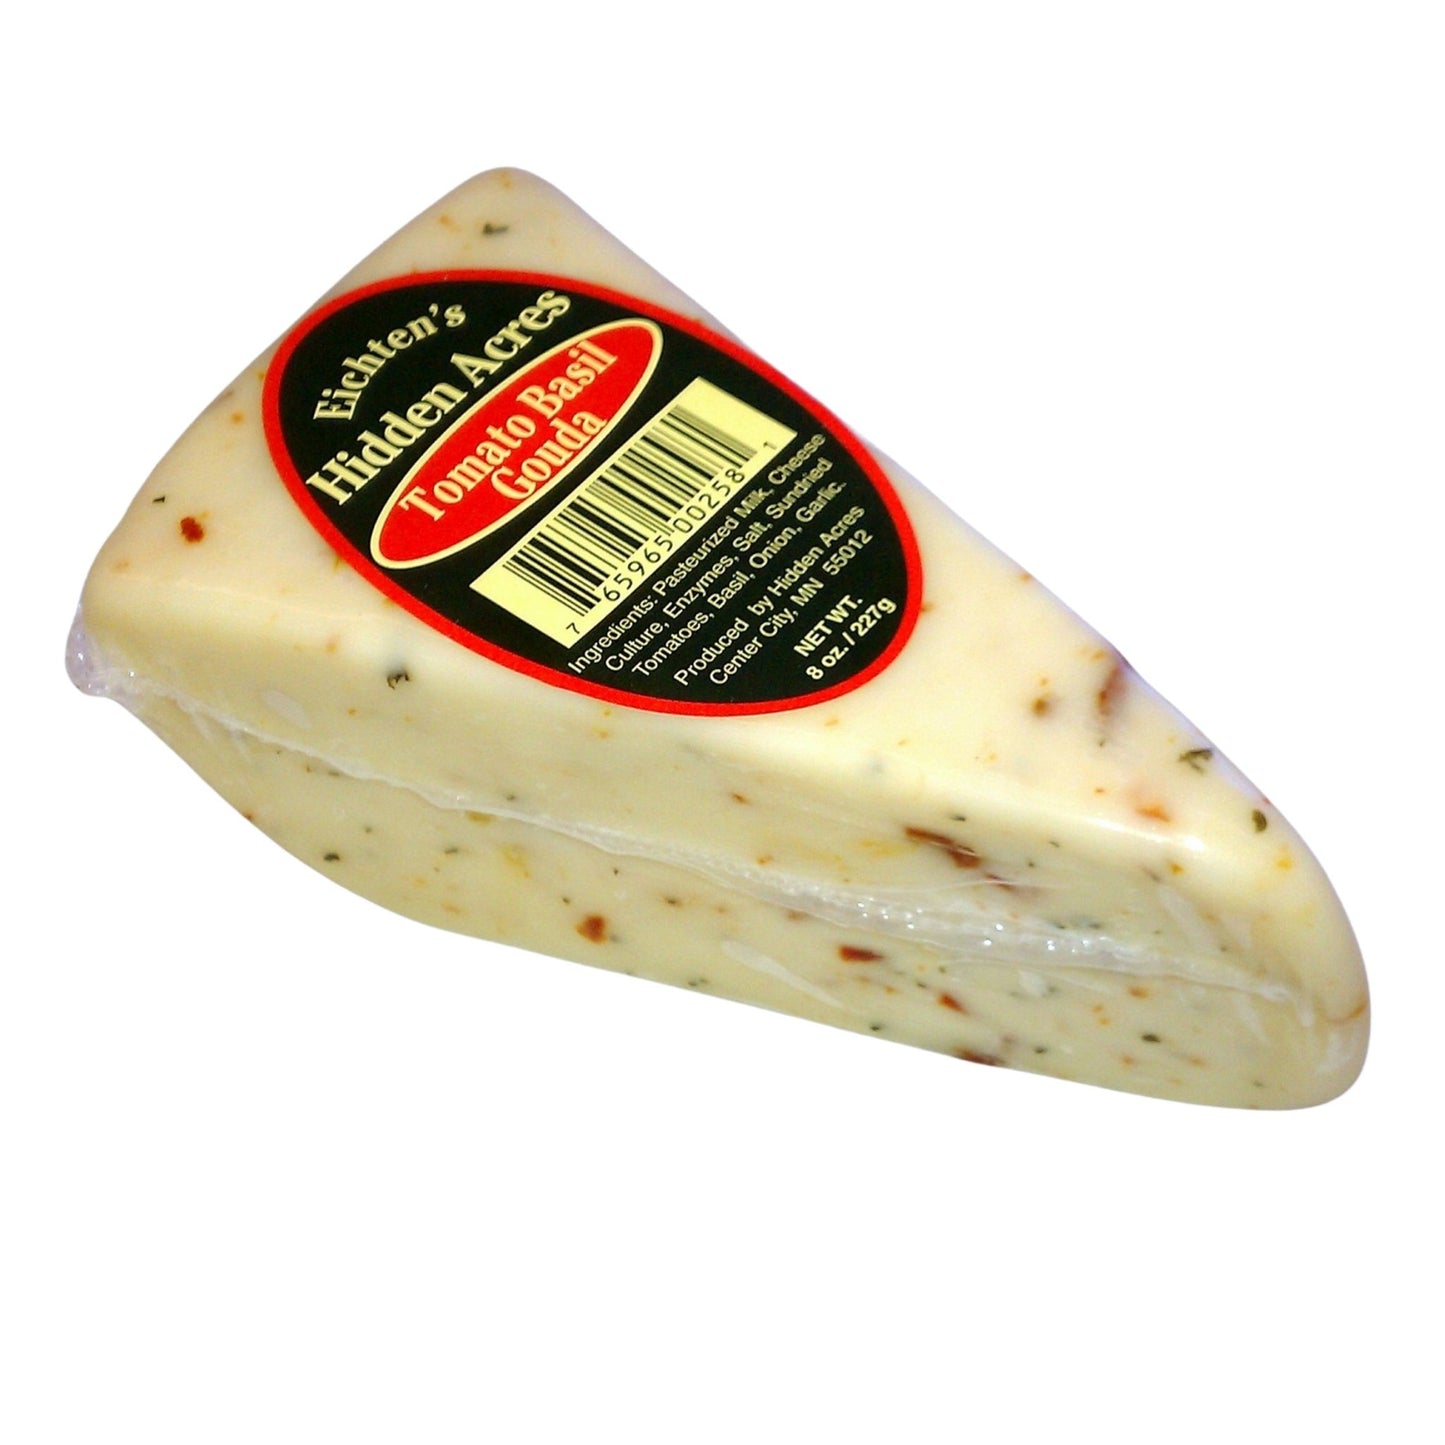 Eichtens Tomato Basil Gouda Cheese - Eichtens Cheeses, Gifts & FoodsAll Products